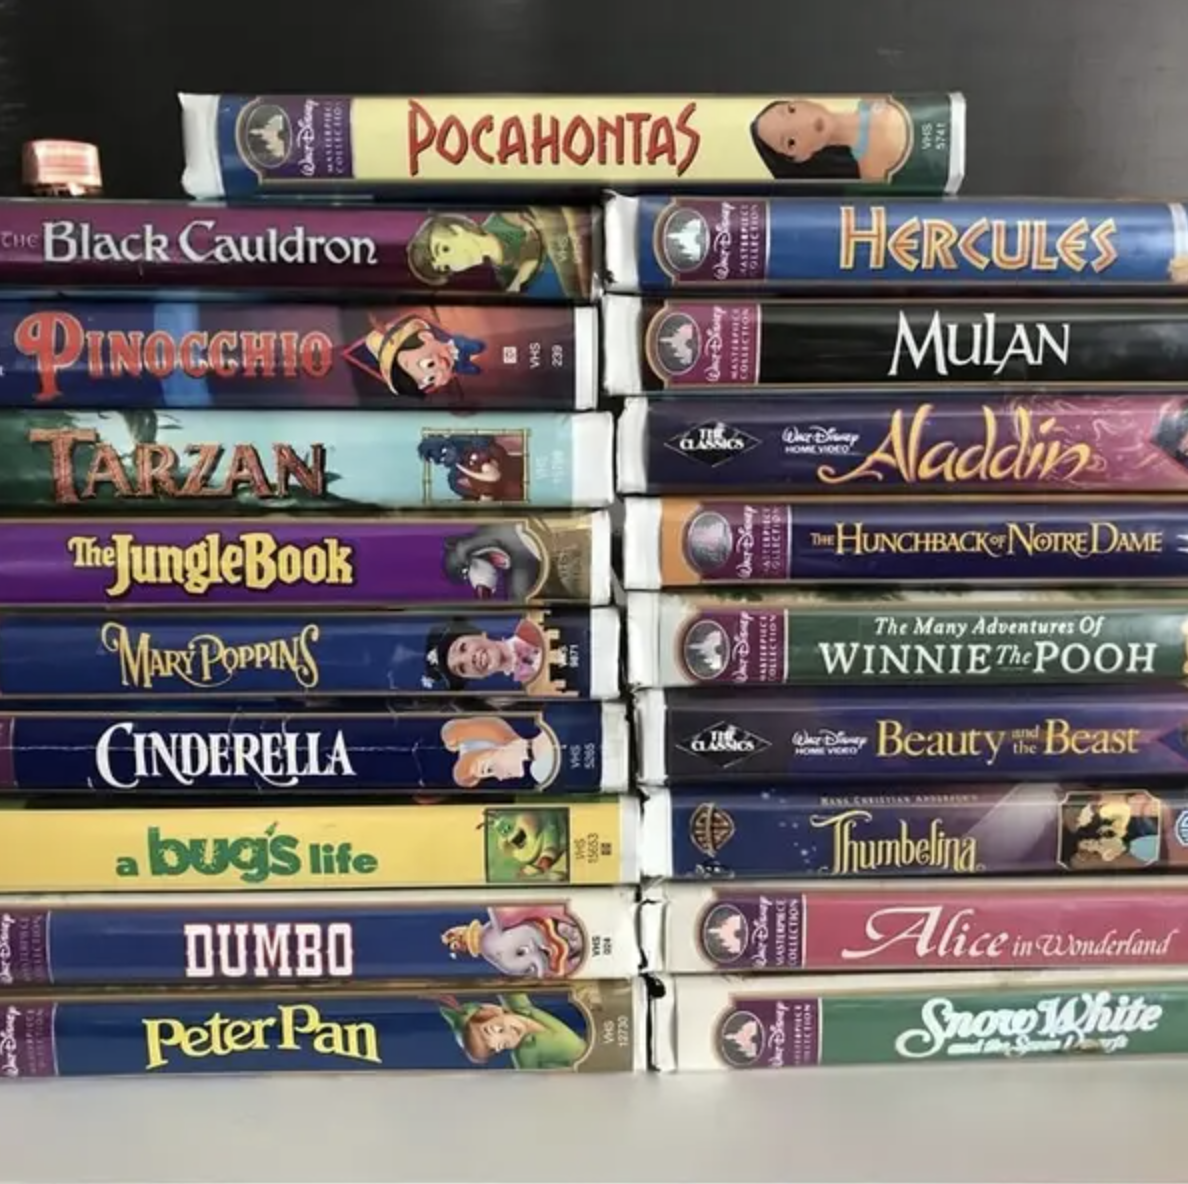 A stack of VHS tapes